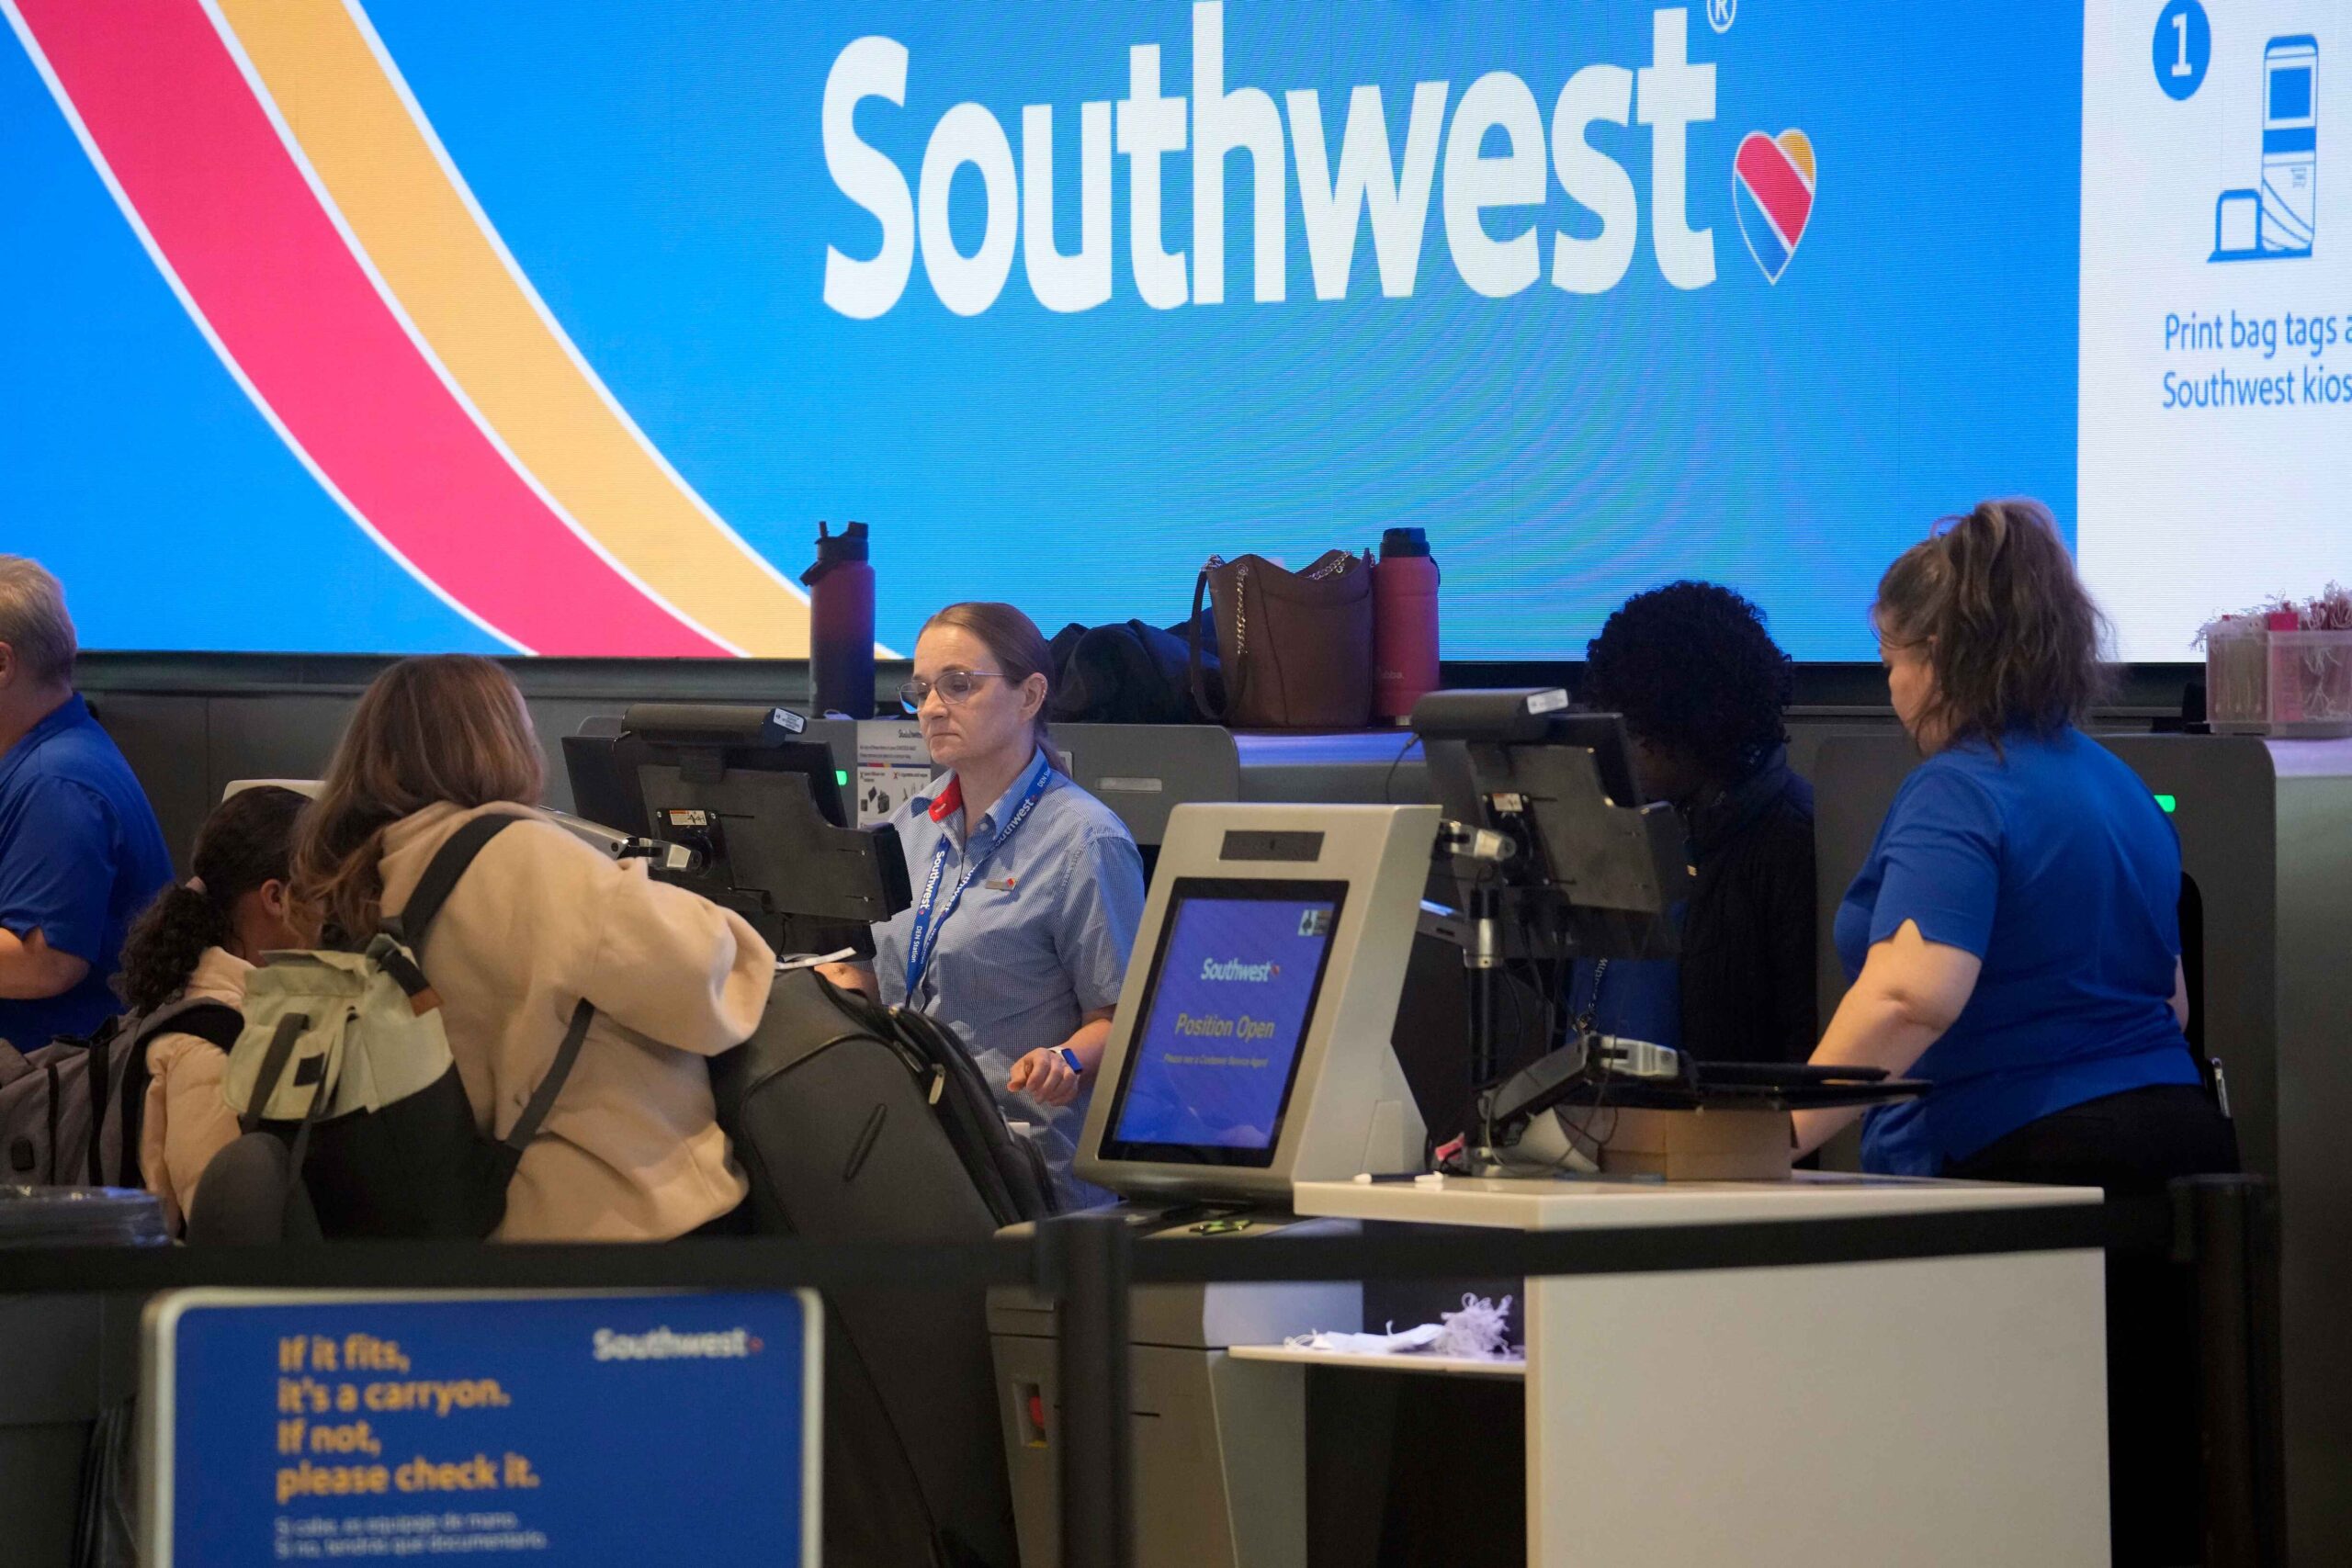 The “Customers of Size” policy from Southwest Airlines provides free extra seats for overweight passengers—even if it means bumping smaller passengers. (AP Photo/David Zalubowski)